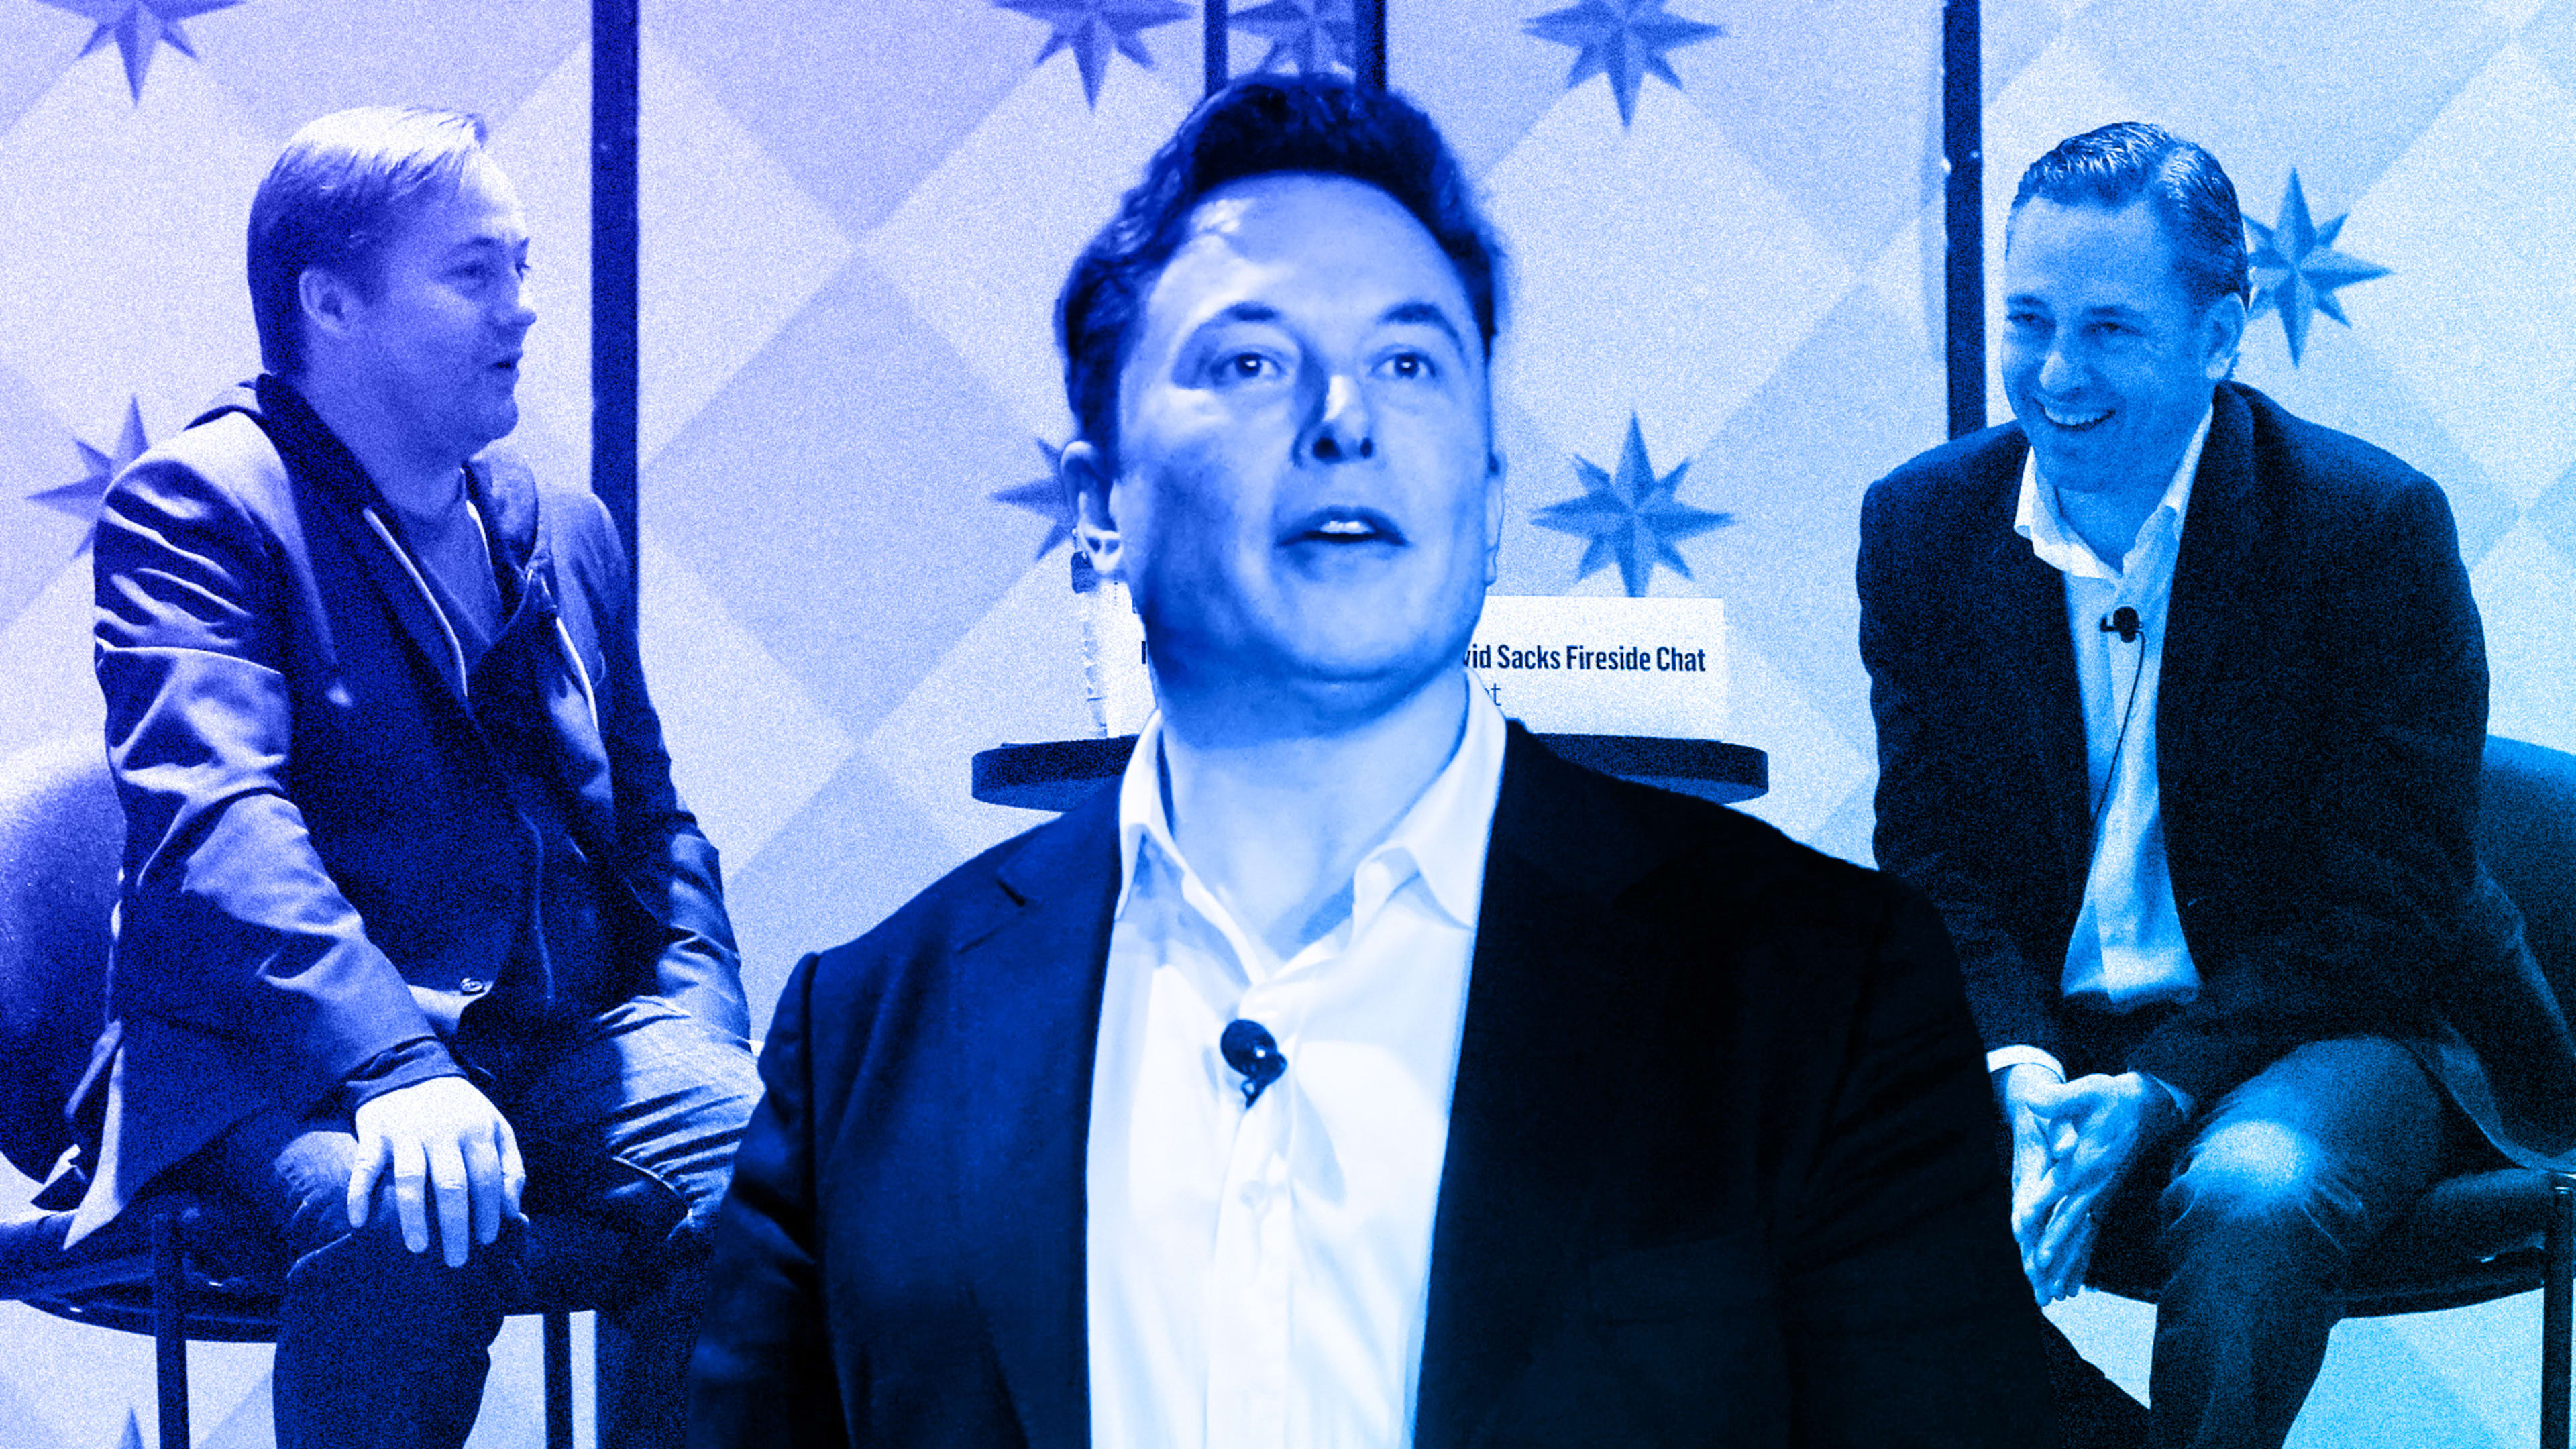 Meet the new team of advisers Elon Musk has tapped to reshape Twitter